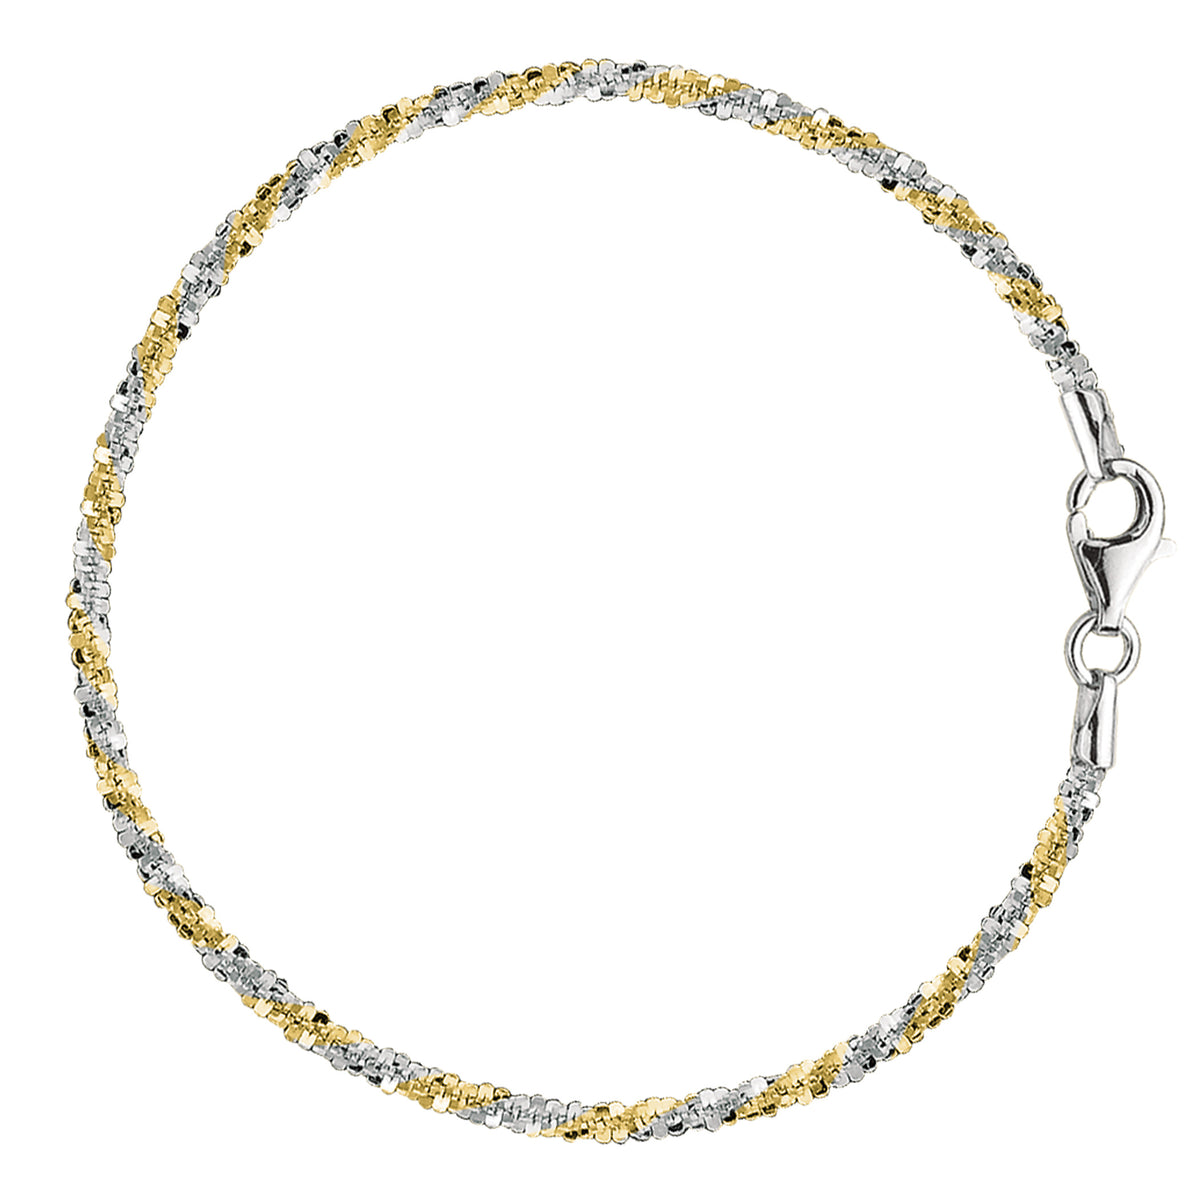 White And Yellow Sparkle Style Chain Anklet In Sterling Silver fine designer jewelry for men and women